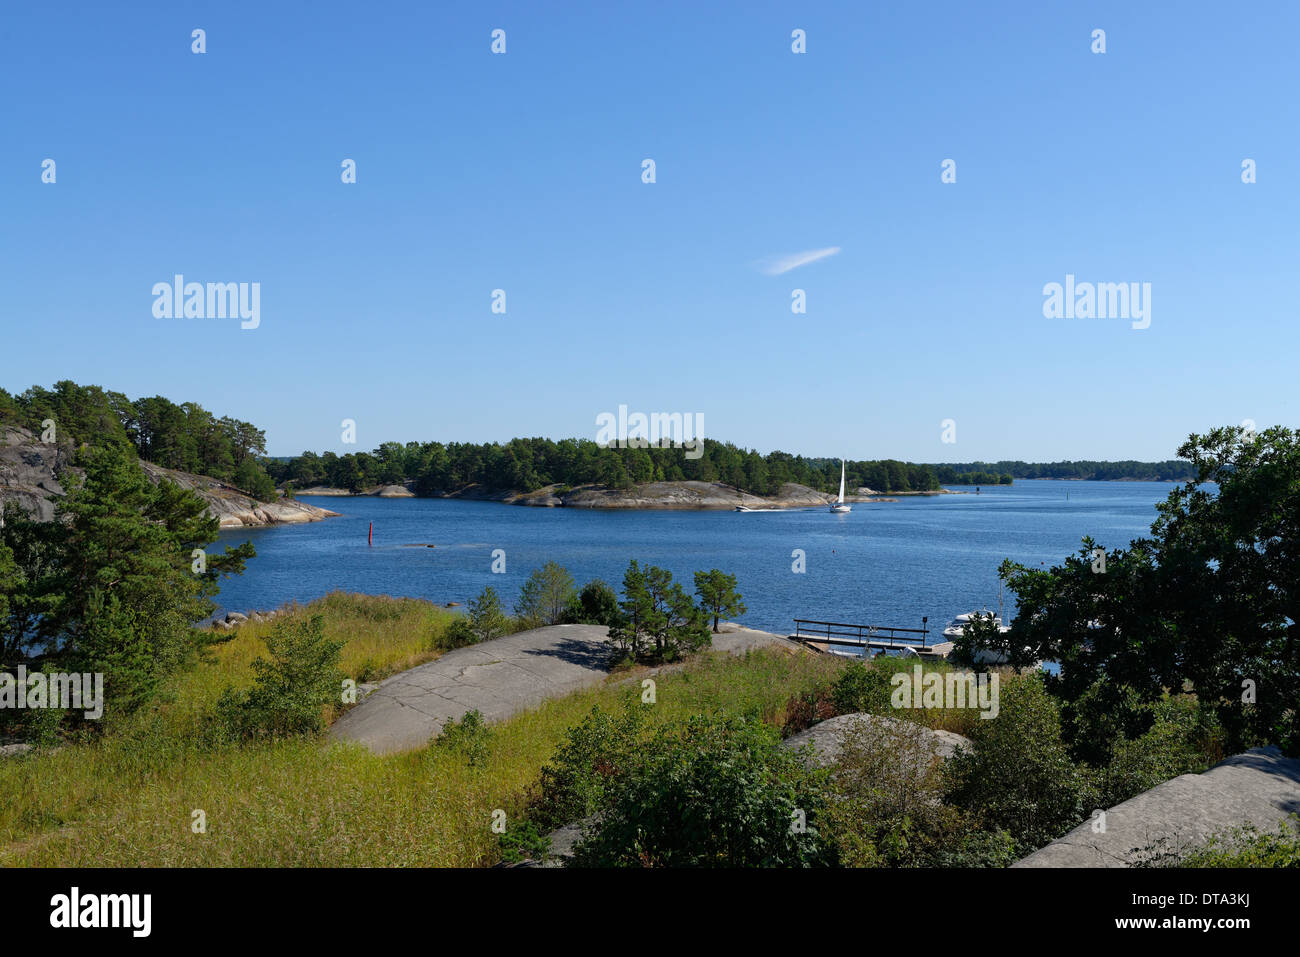 Typical round polished rocks, roches moutonnées, on Finnhamn Island in the Stockholm Middle Archipelago, Stockholm, Sweden Stock Photo